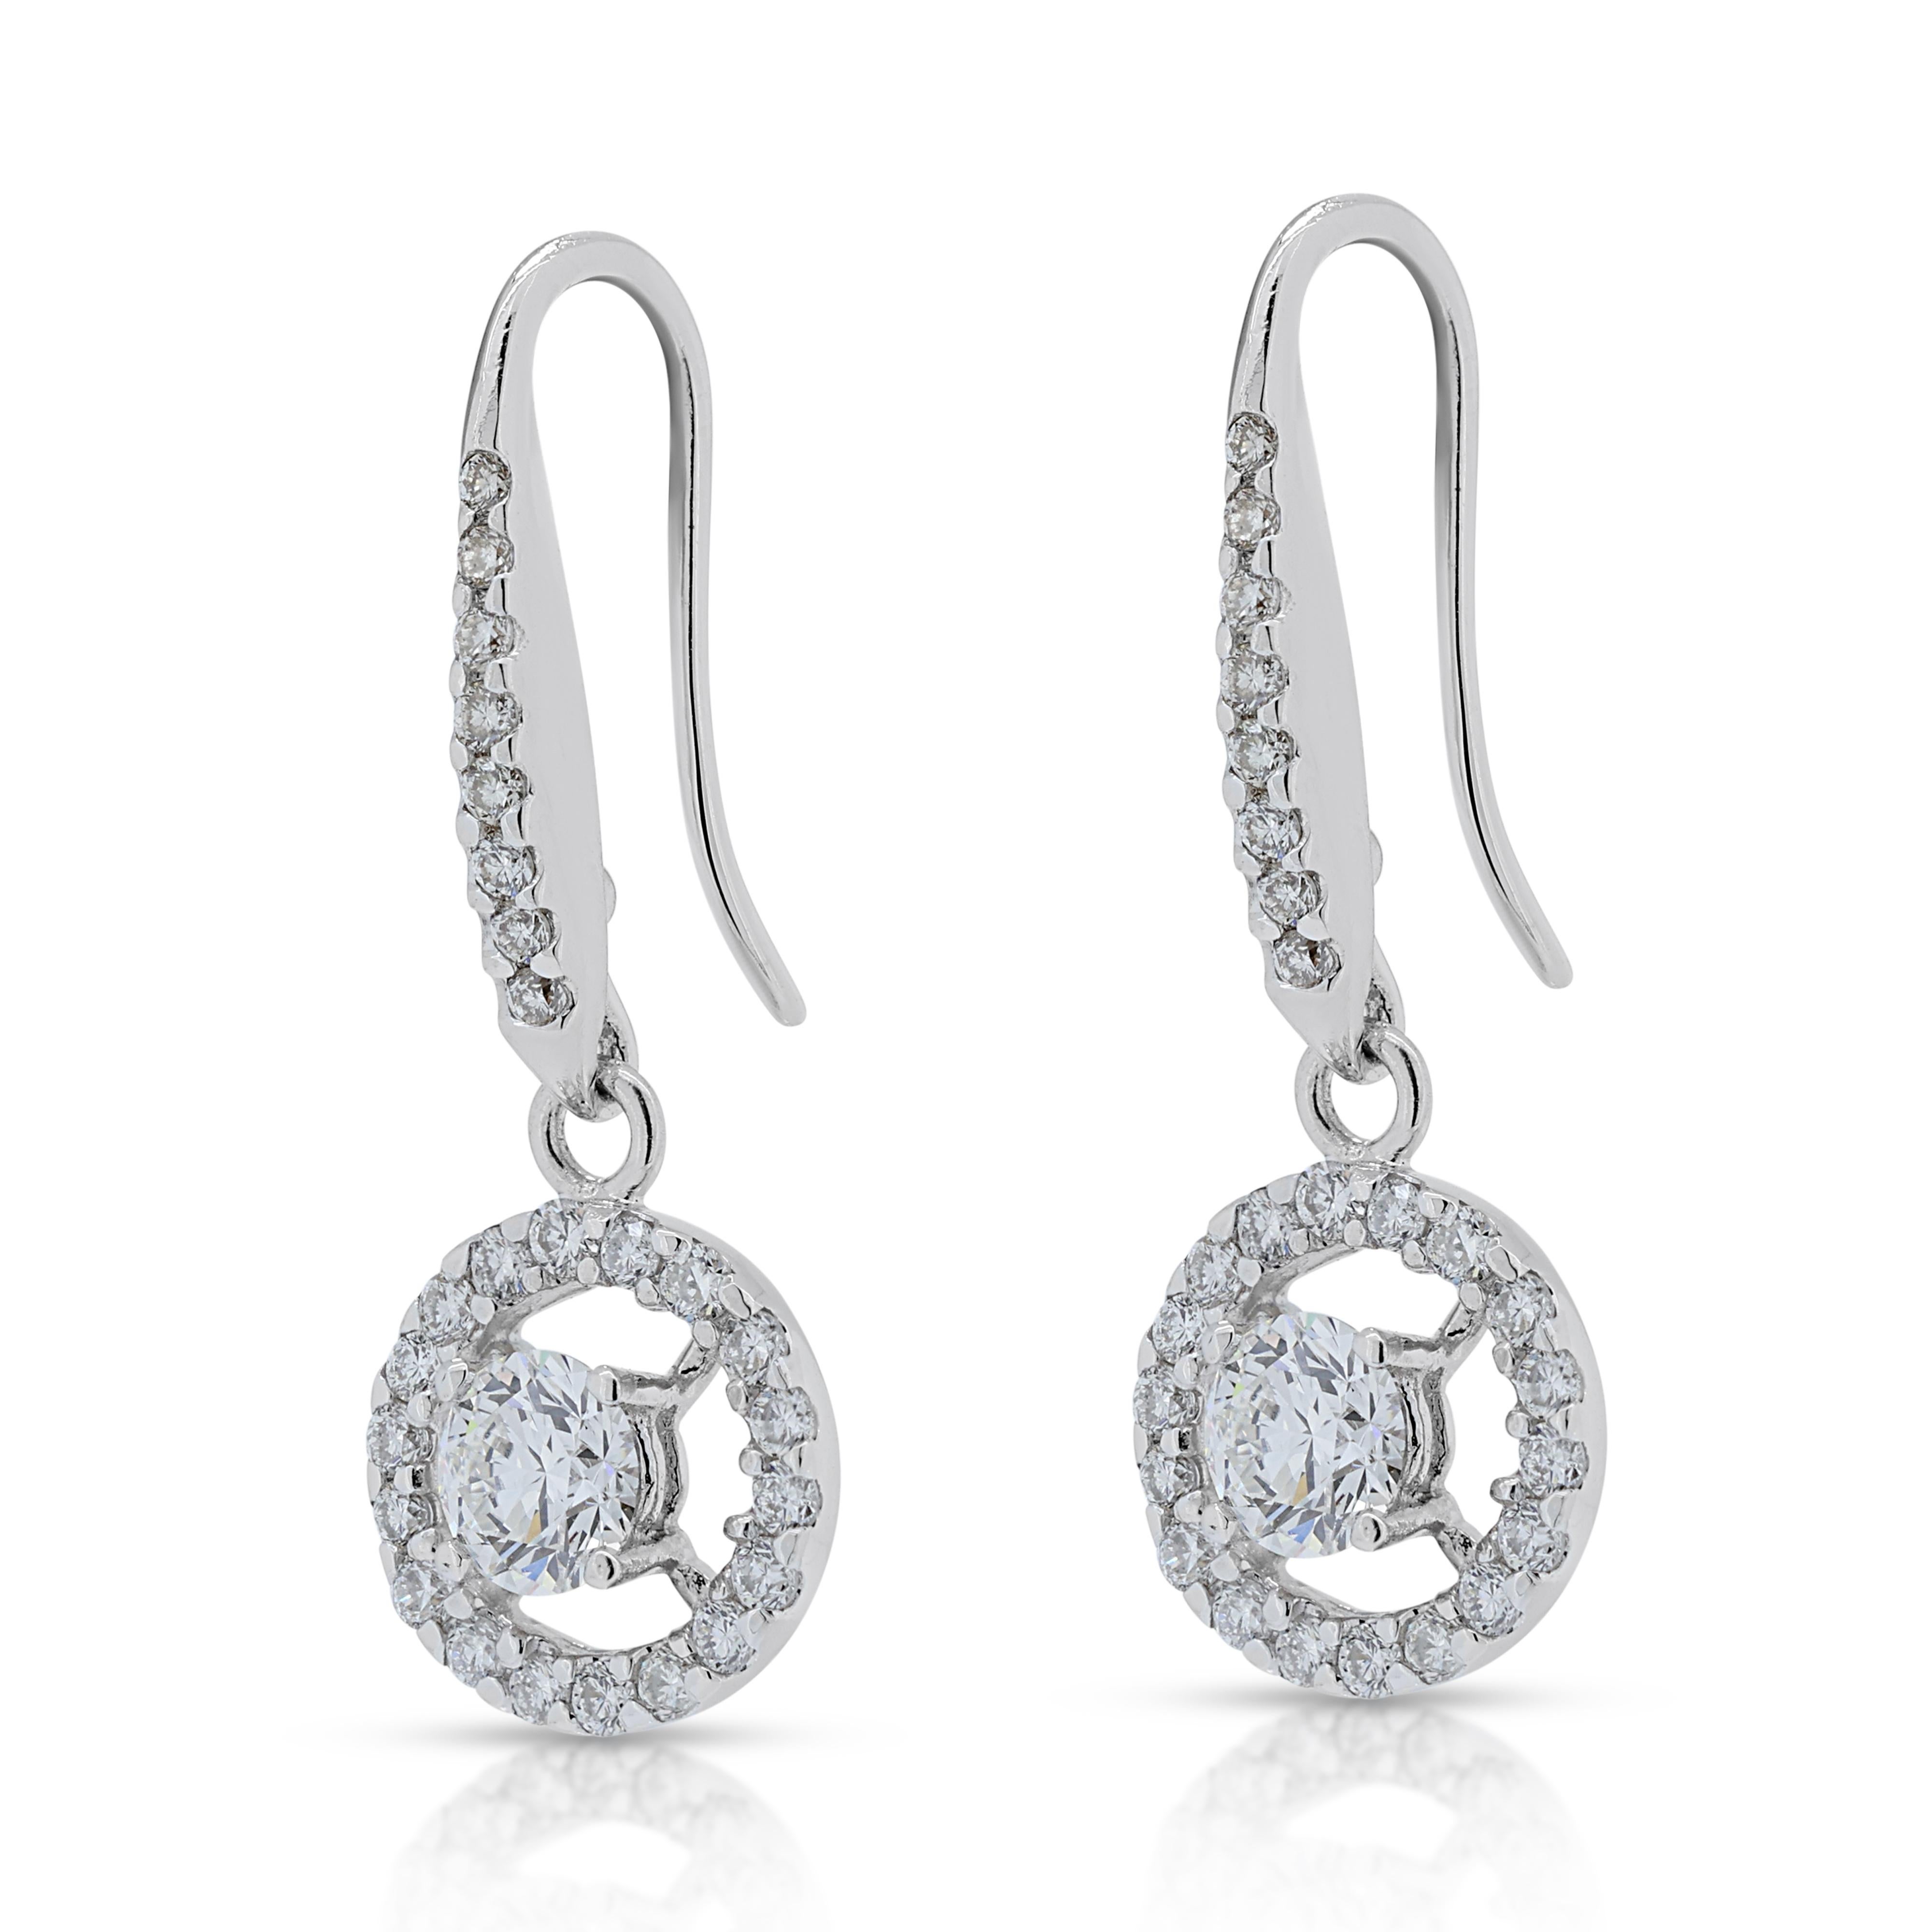 Fascinating 0.86ct Diamond Dangling Earrings in 18K White Gold  In Excellent Condition For Sale In רמת גן, IL